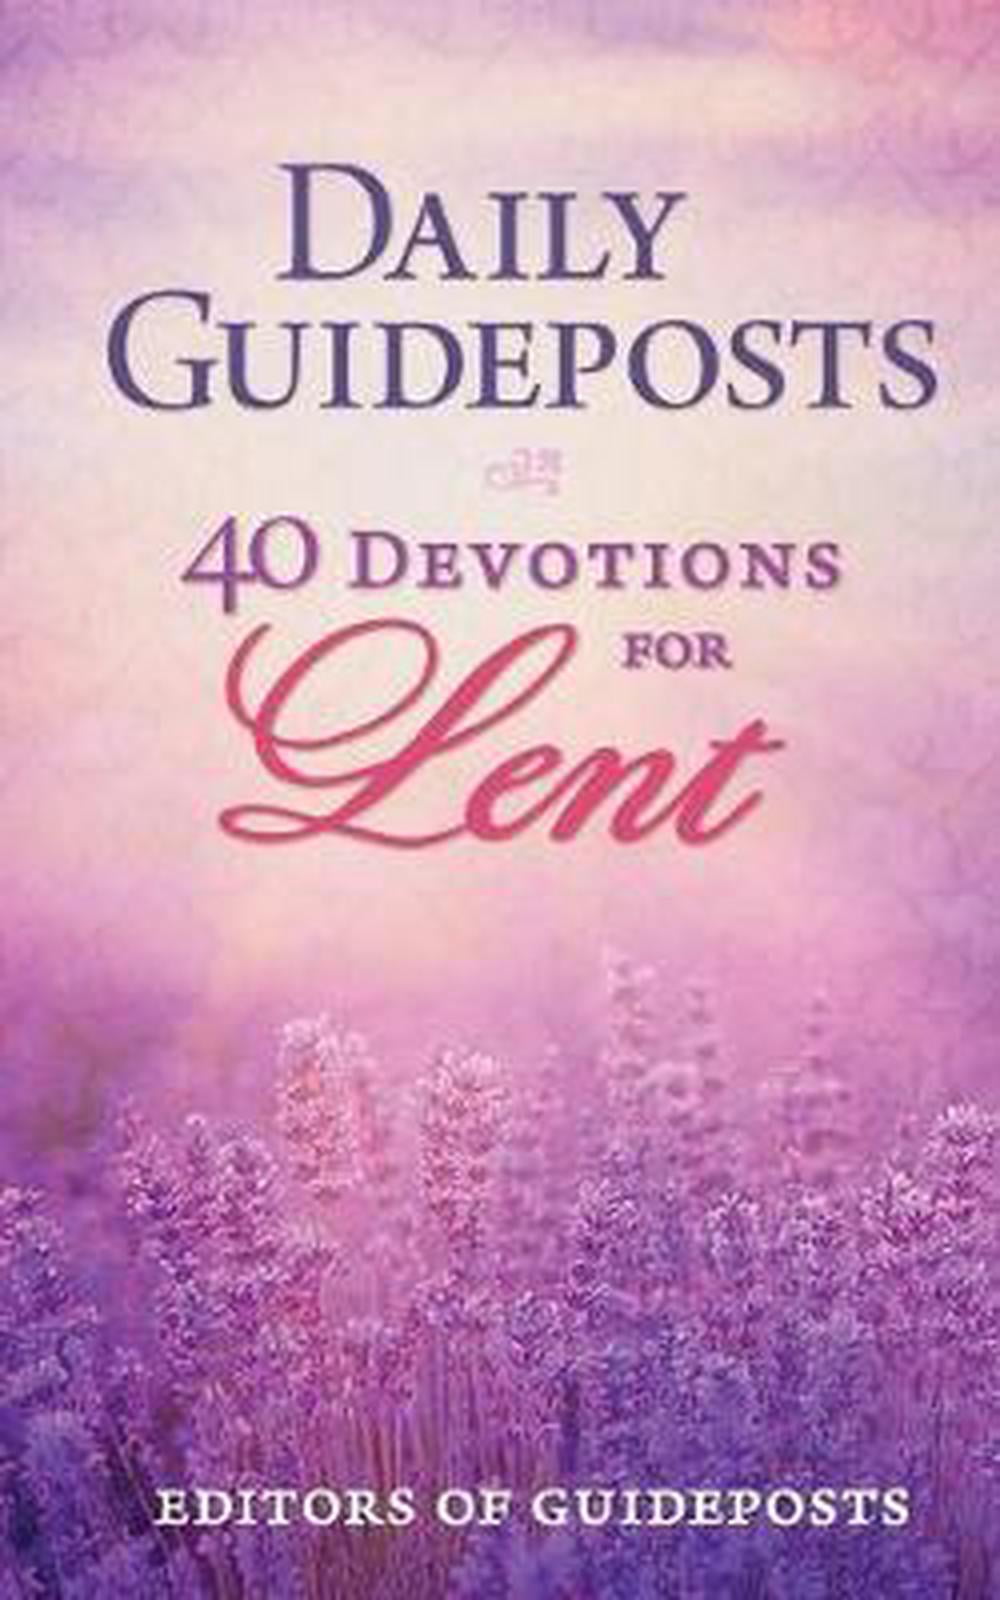 Daily Guideposts 40 Devotions for Lent (Paperback)